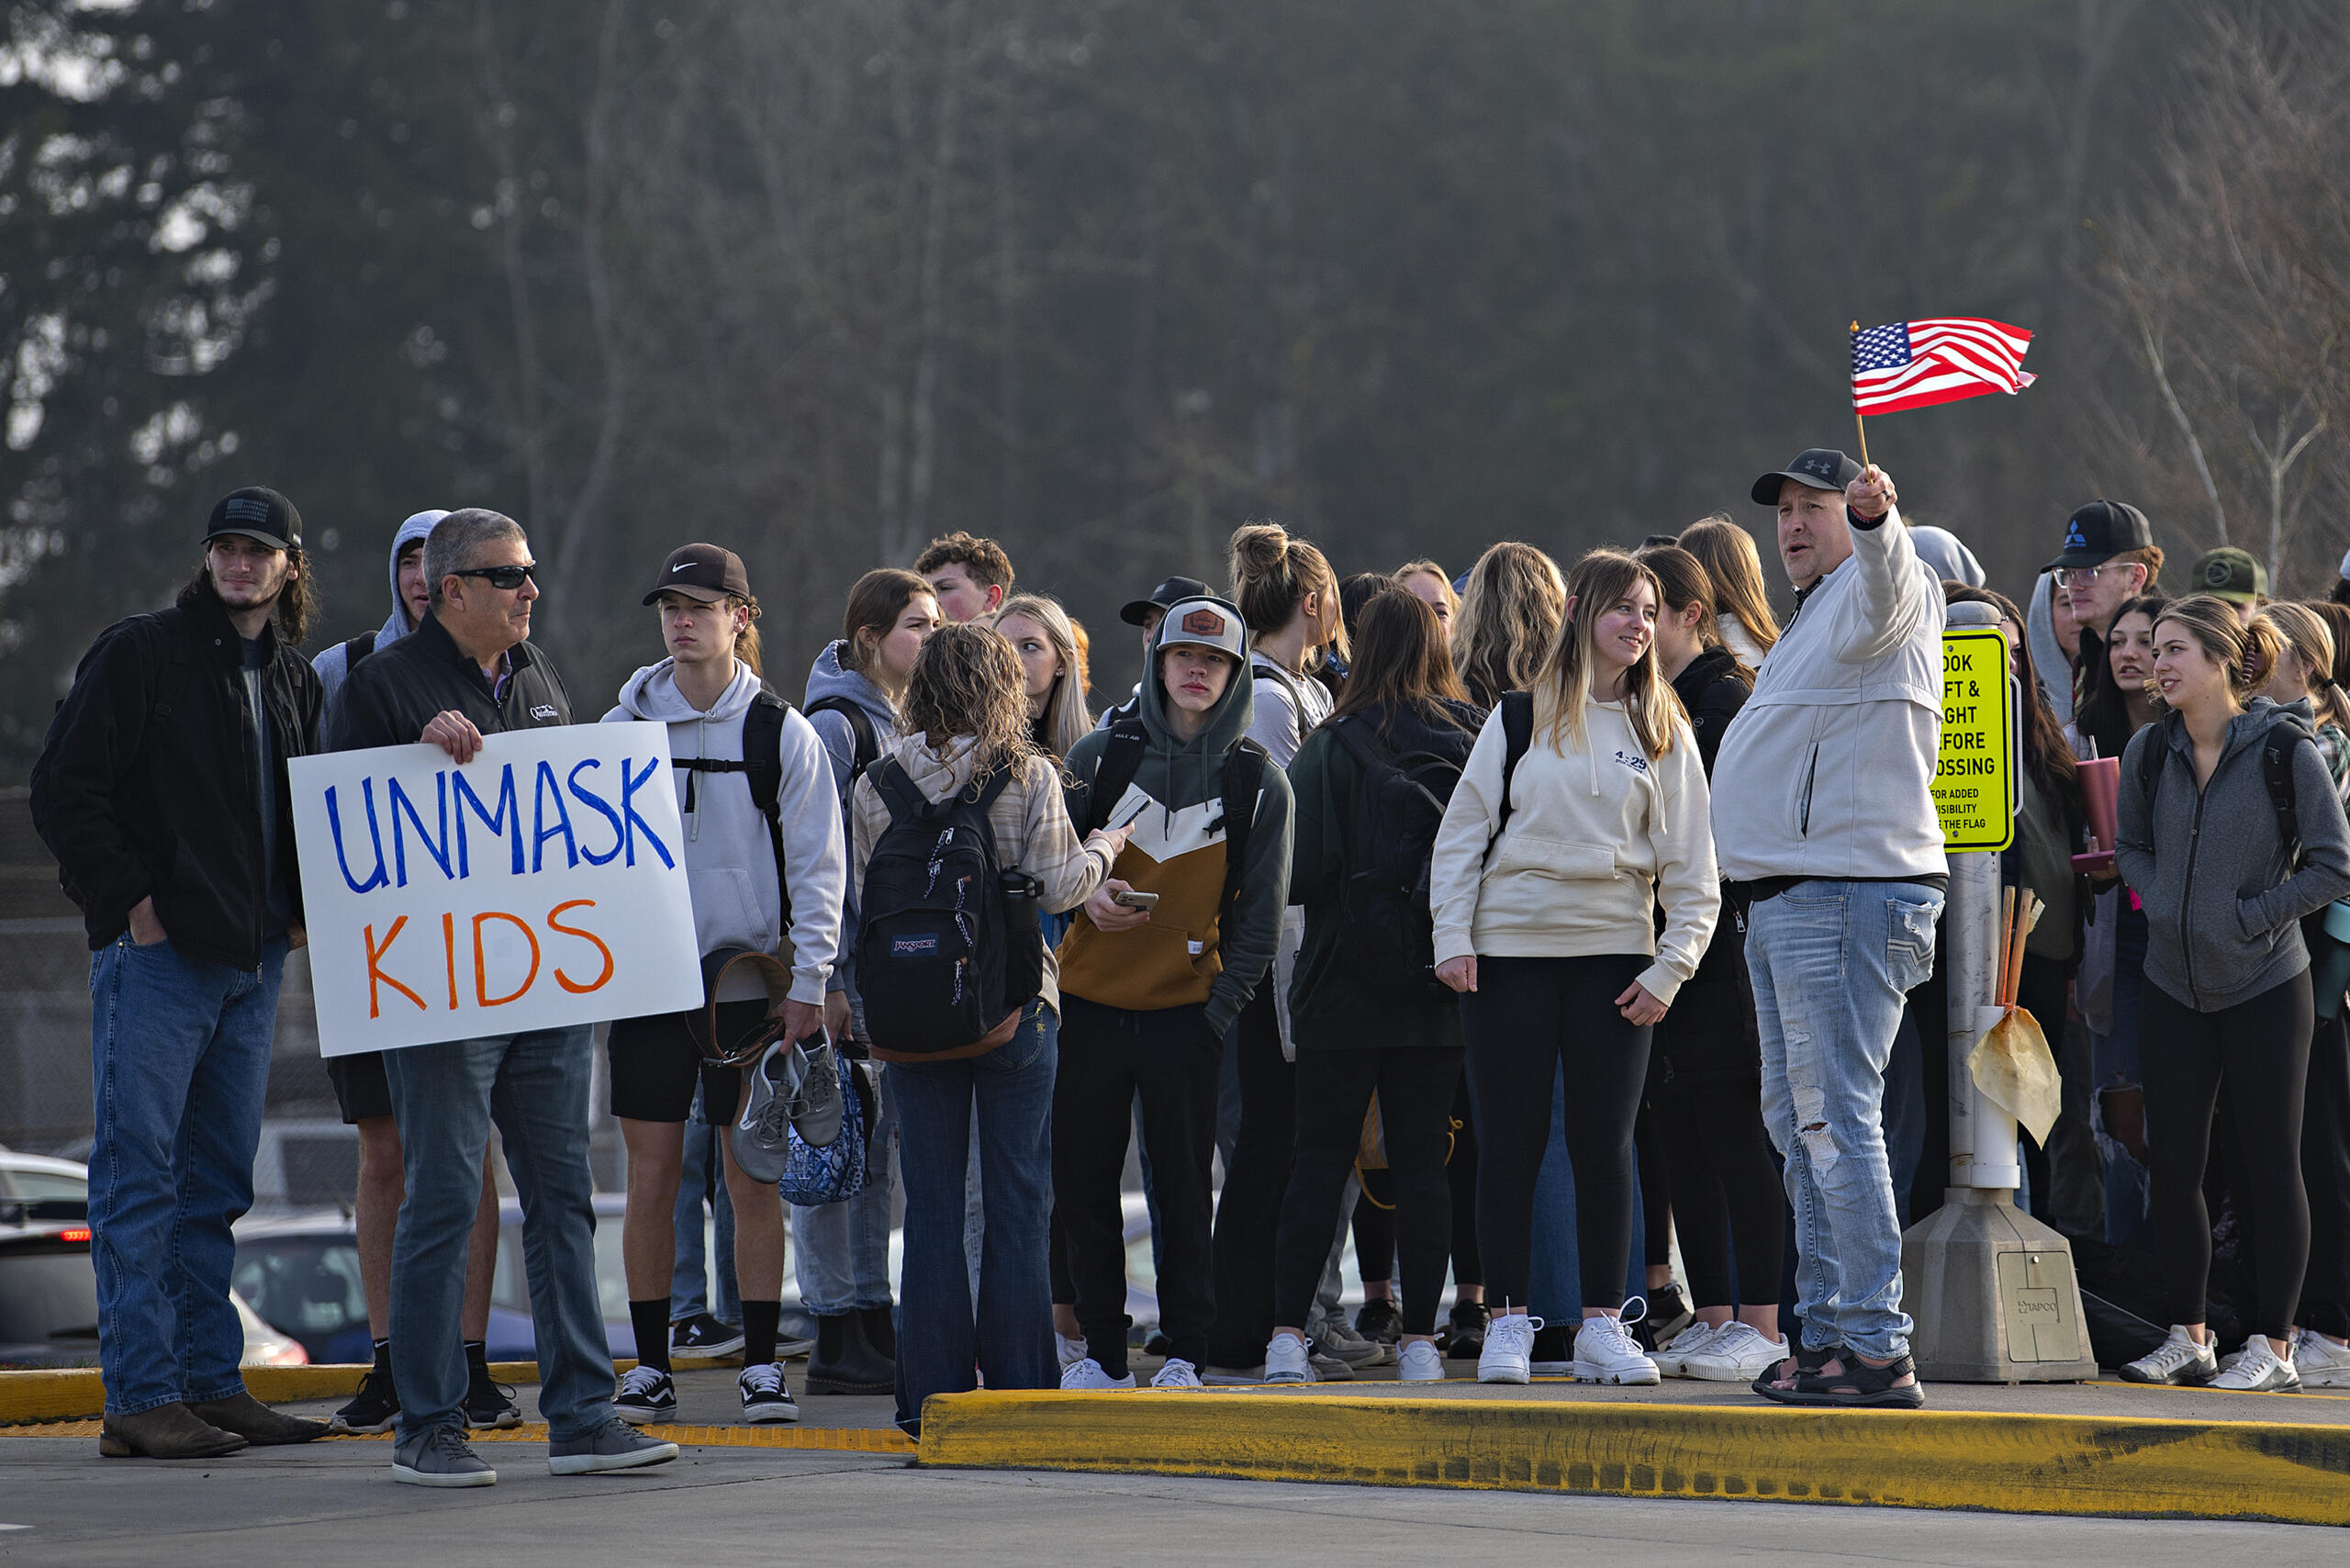 Students join a small group of protesters as they walk out of class while demonstrating against mandatory masks in schools outside Ridgefield High School on Wednesday morning, Feb. 9, 2022.